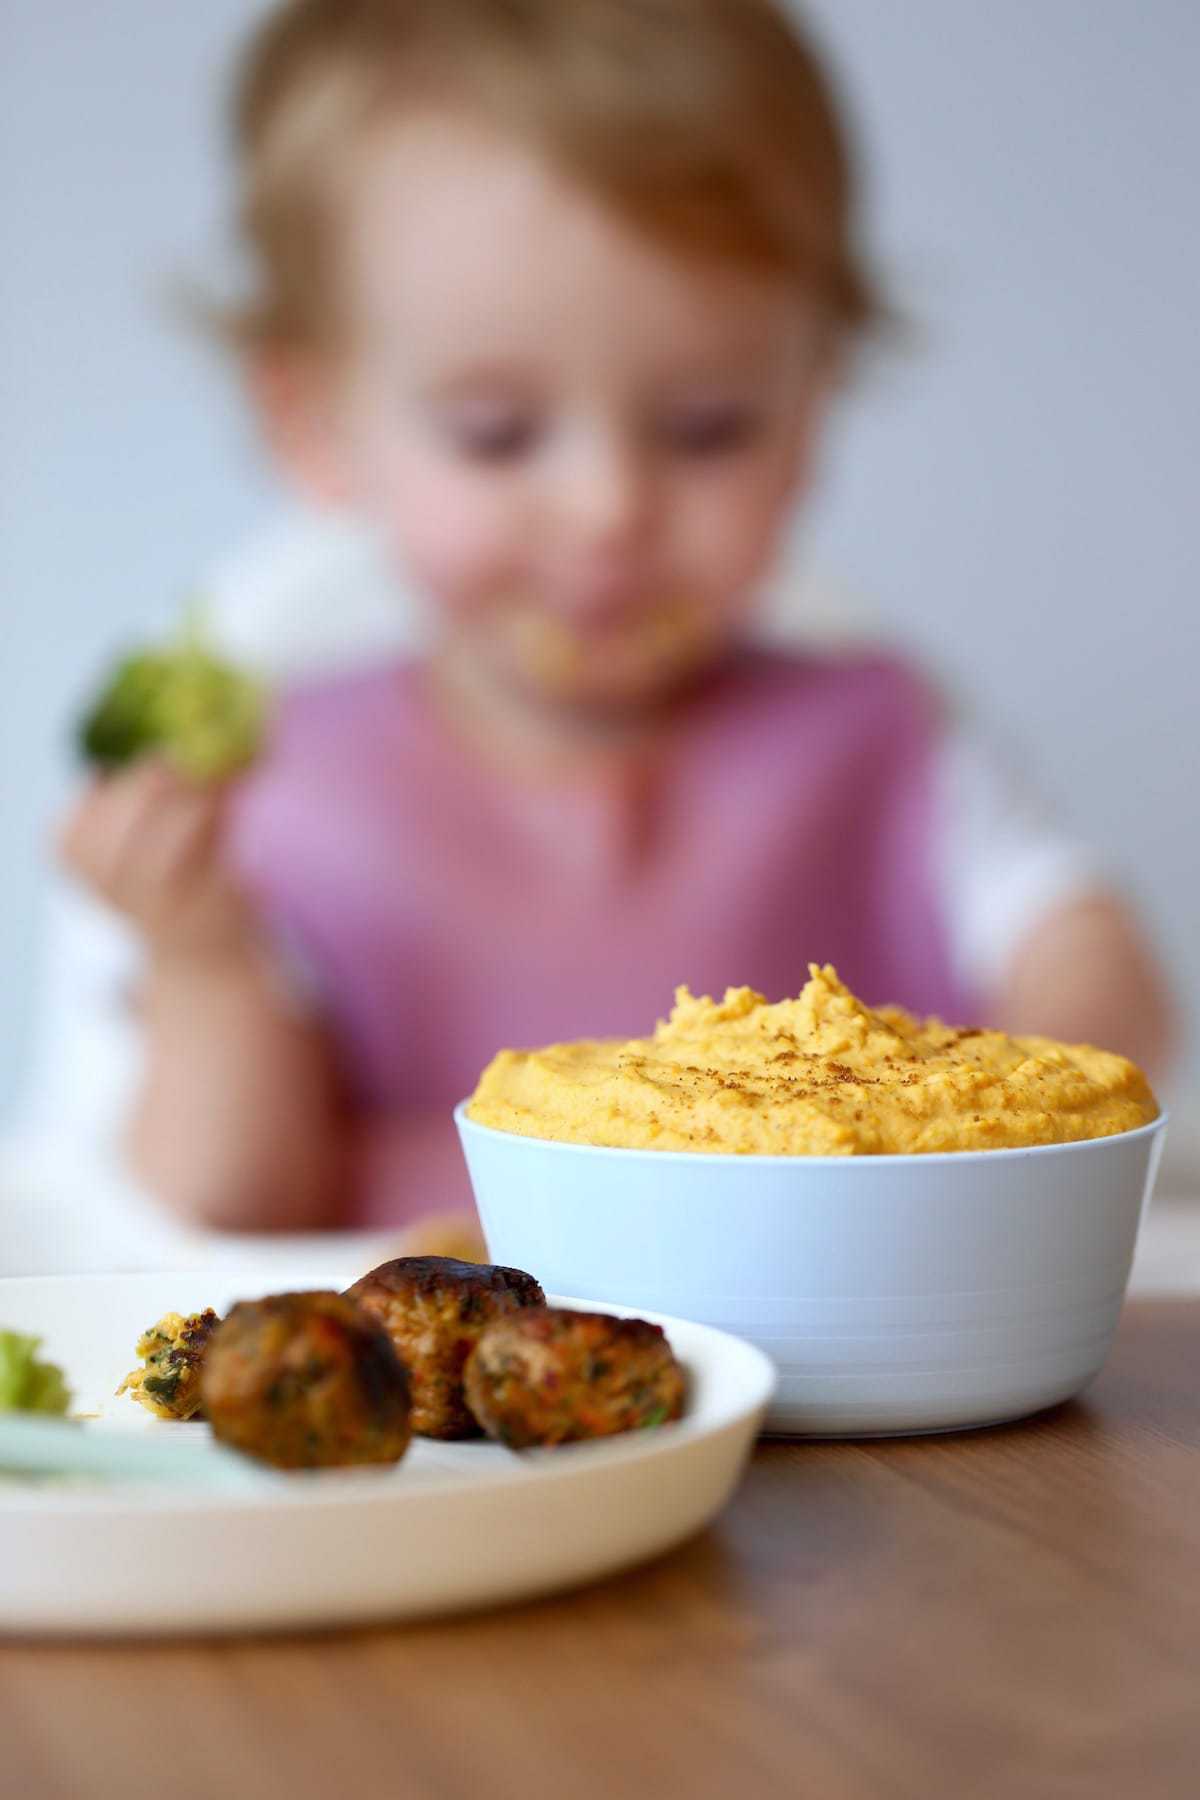 a bowl of carrot hummus on a table with a little girl in the background